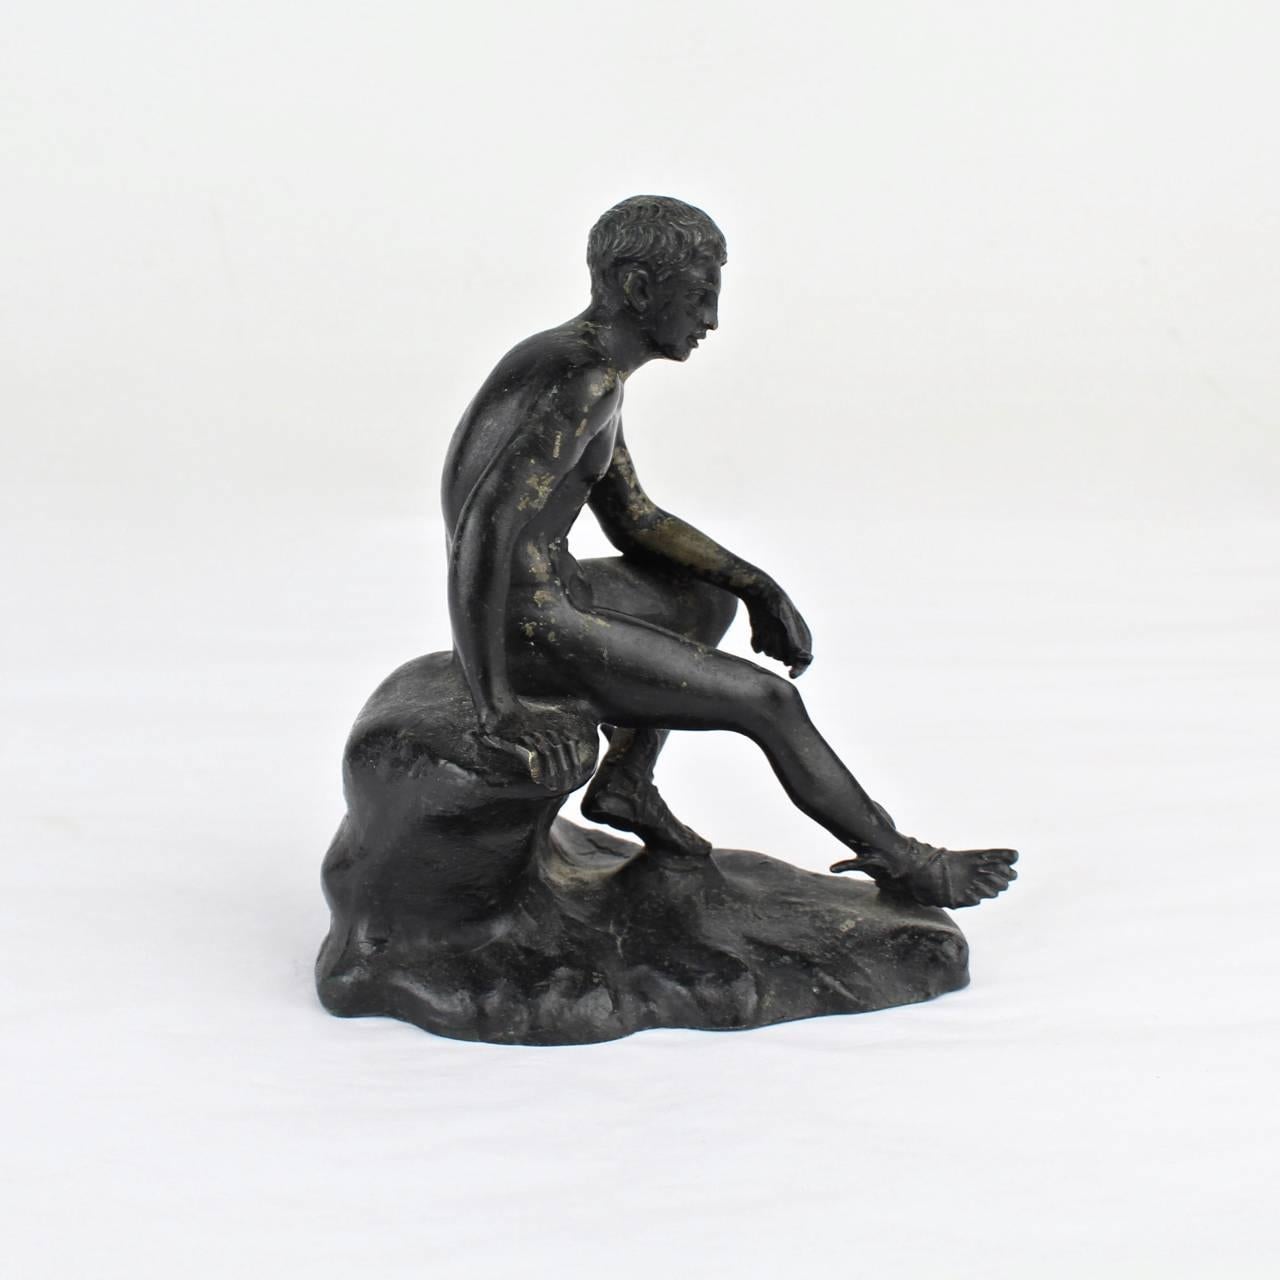 Italian Antique Miniature Grand Tour Bronze Sculpture of a Seated Hermes After Lysippos